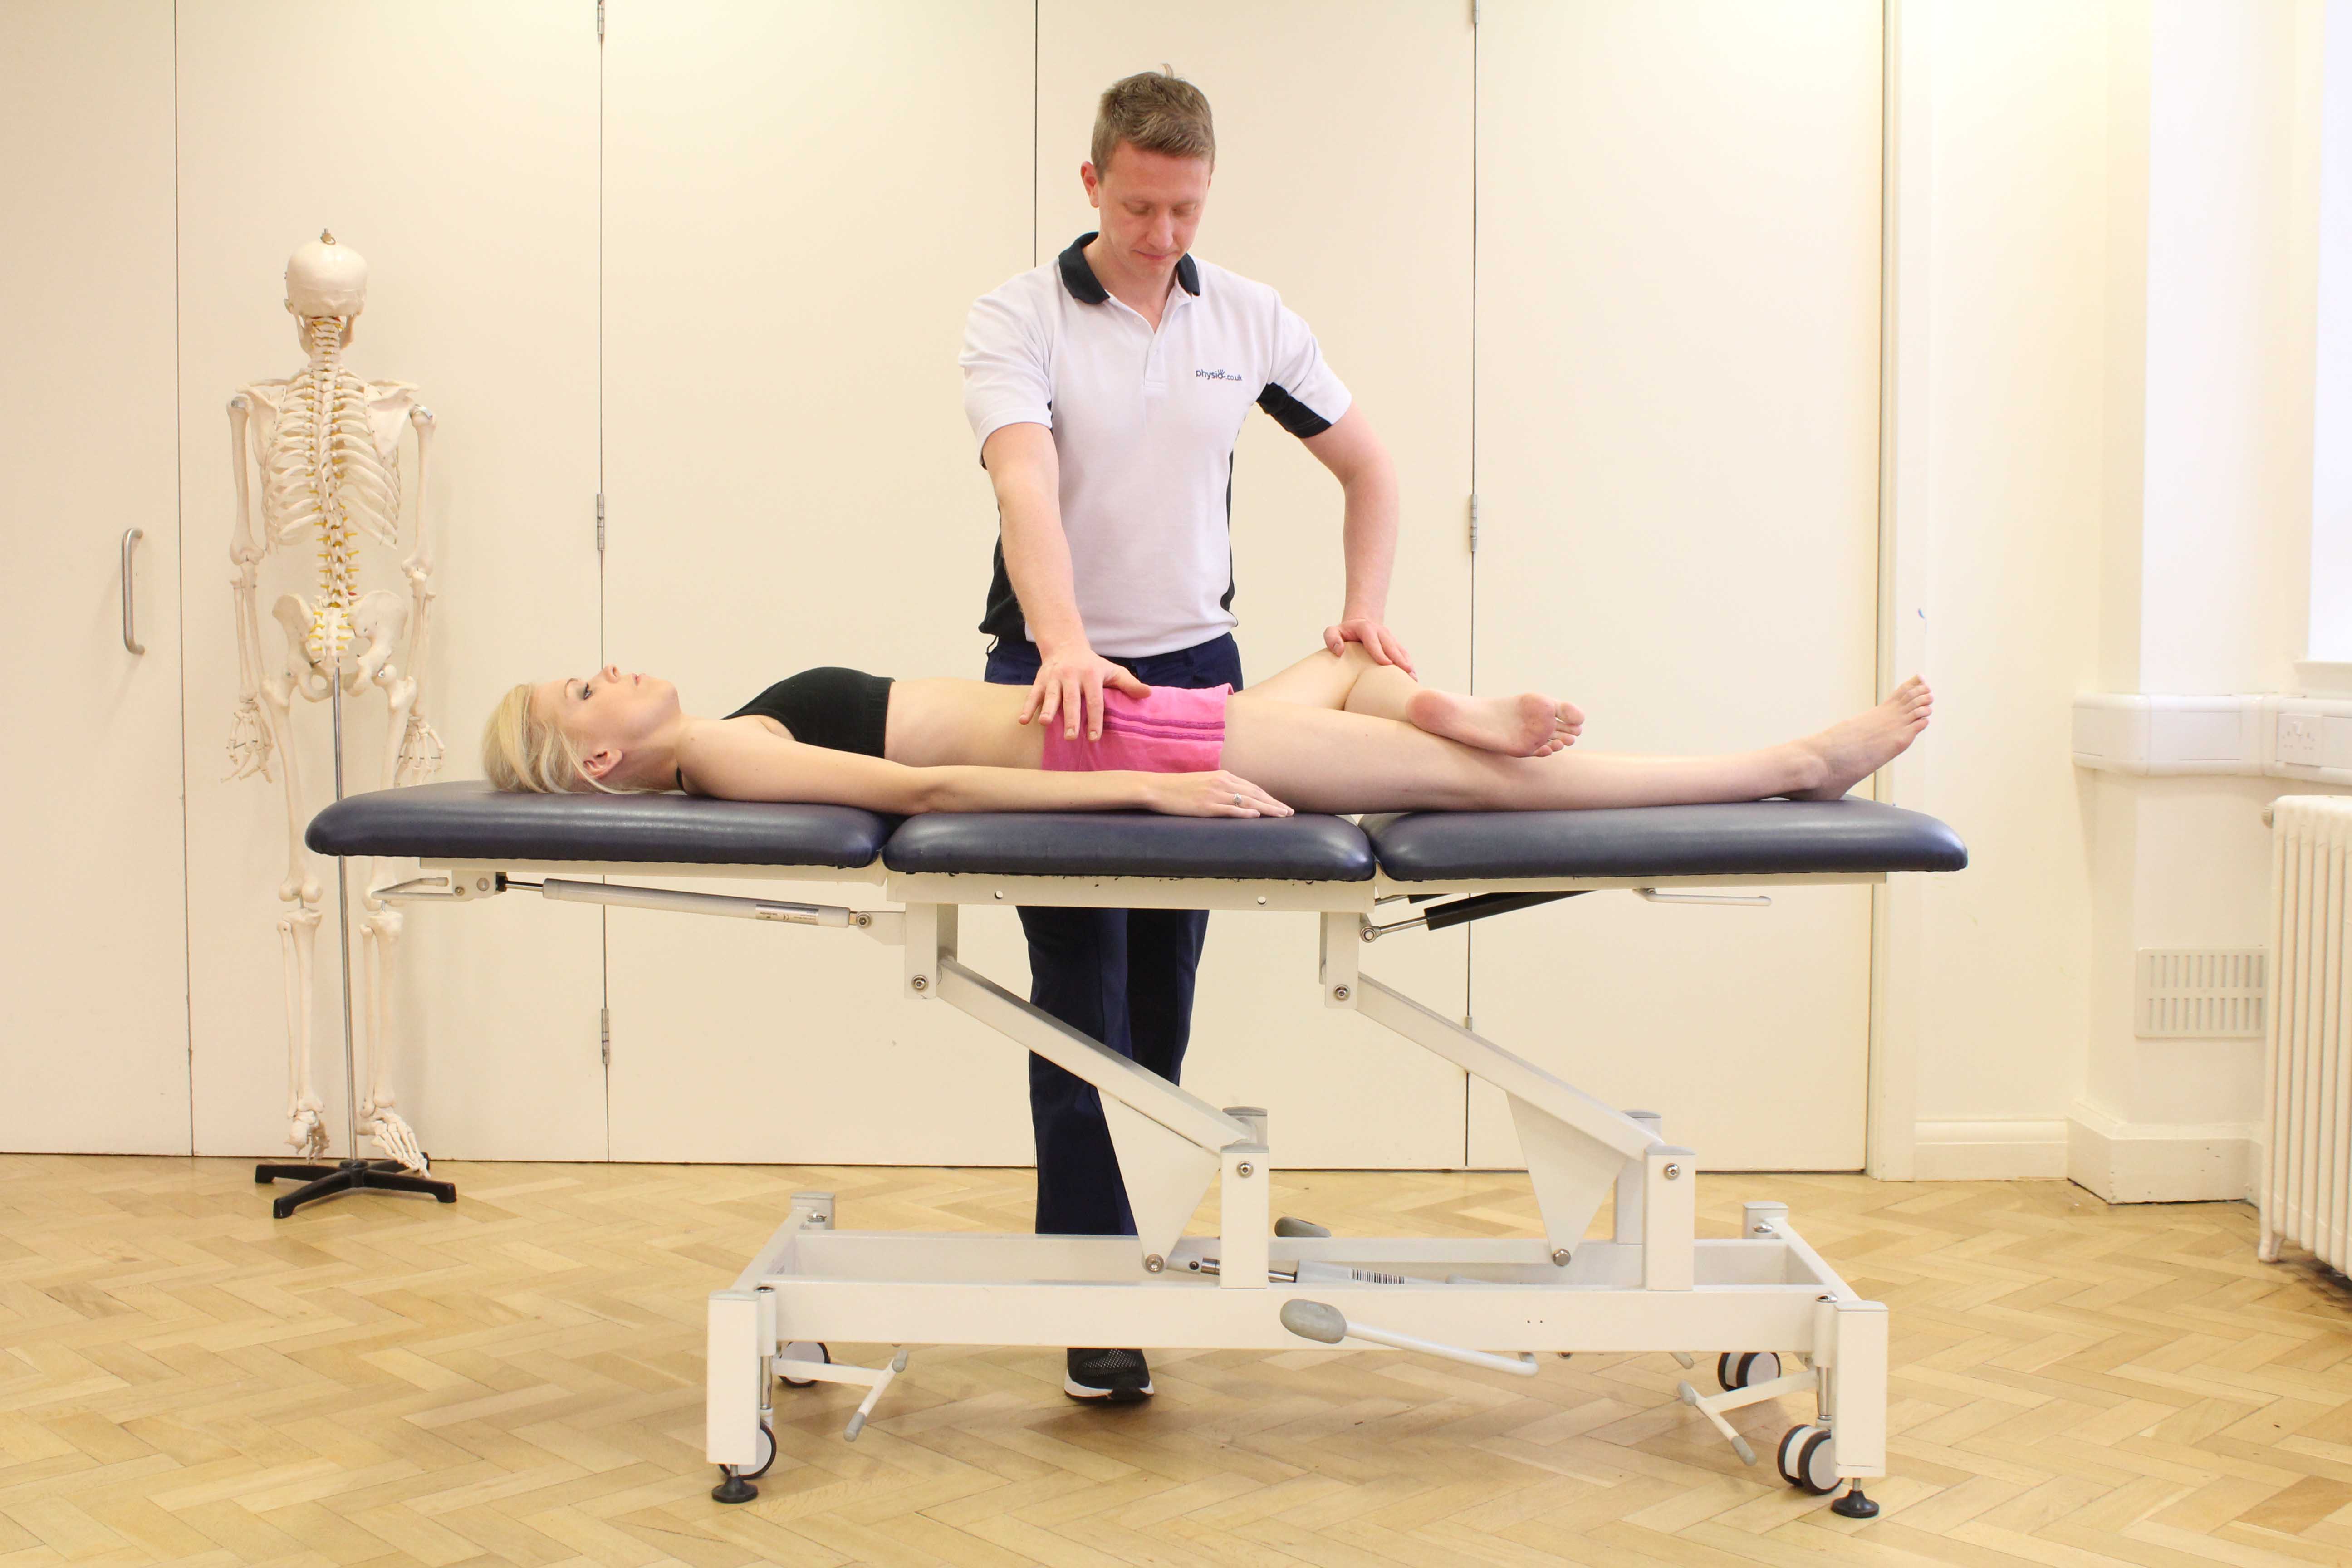 Passive stretches of the hip and pelvis performed by a senior musculoskeletal physiotherapsit